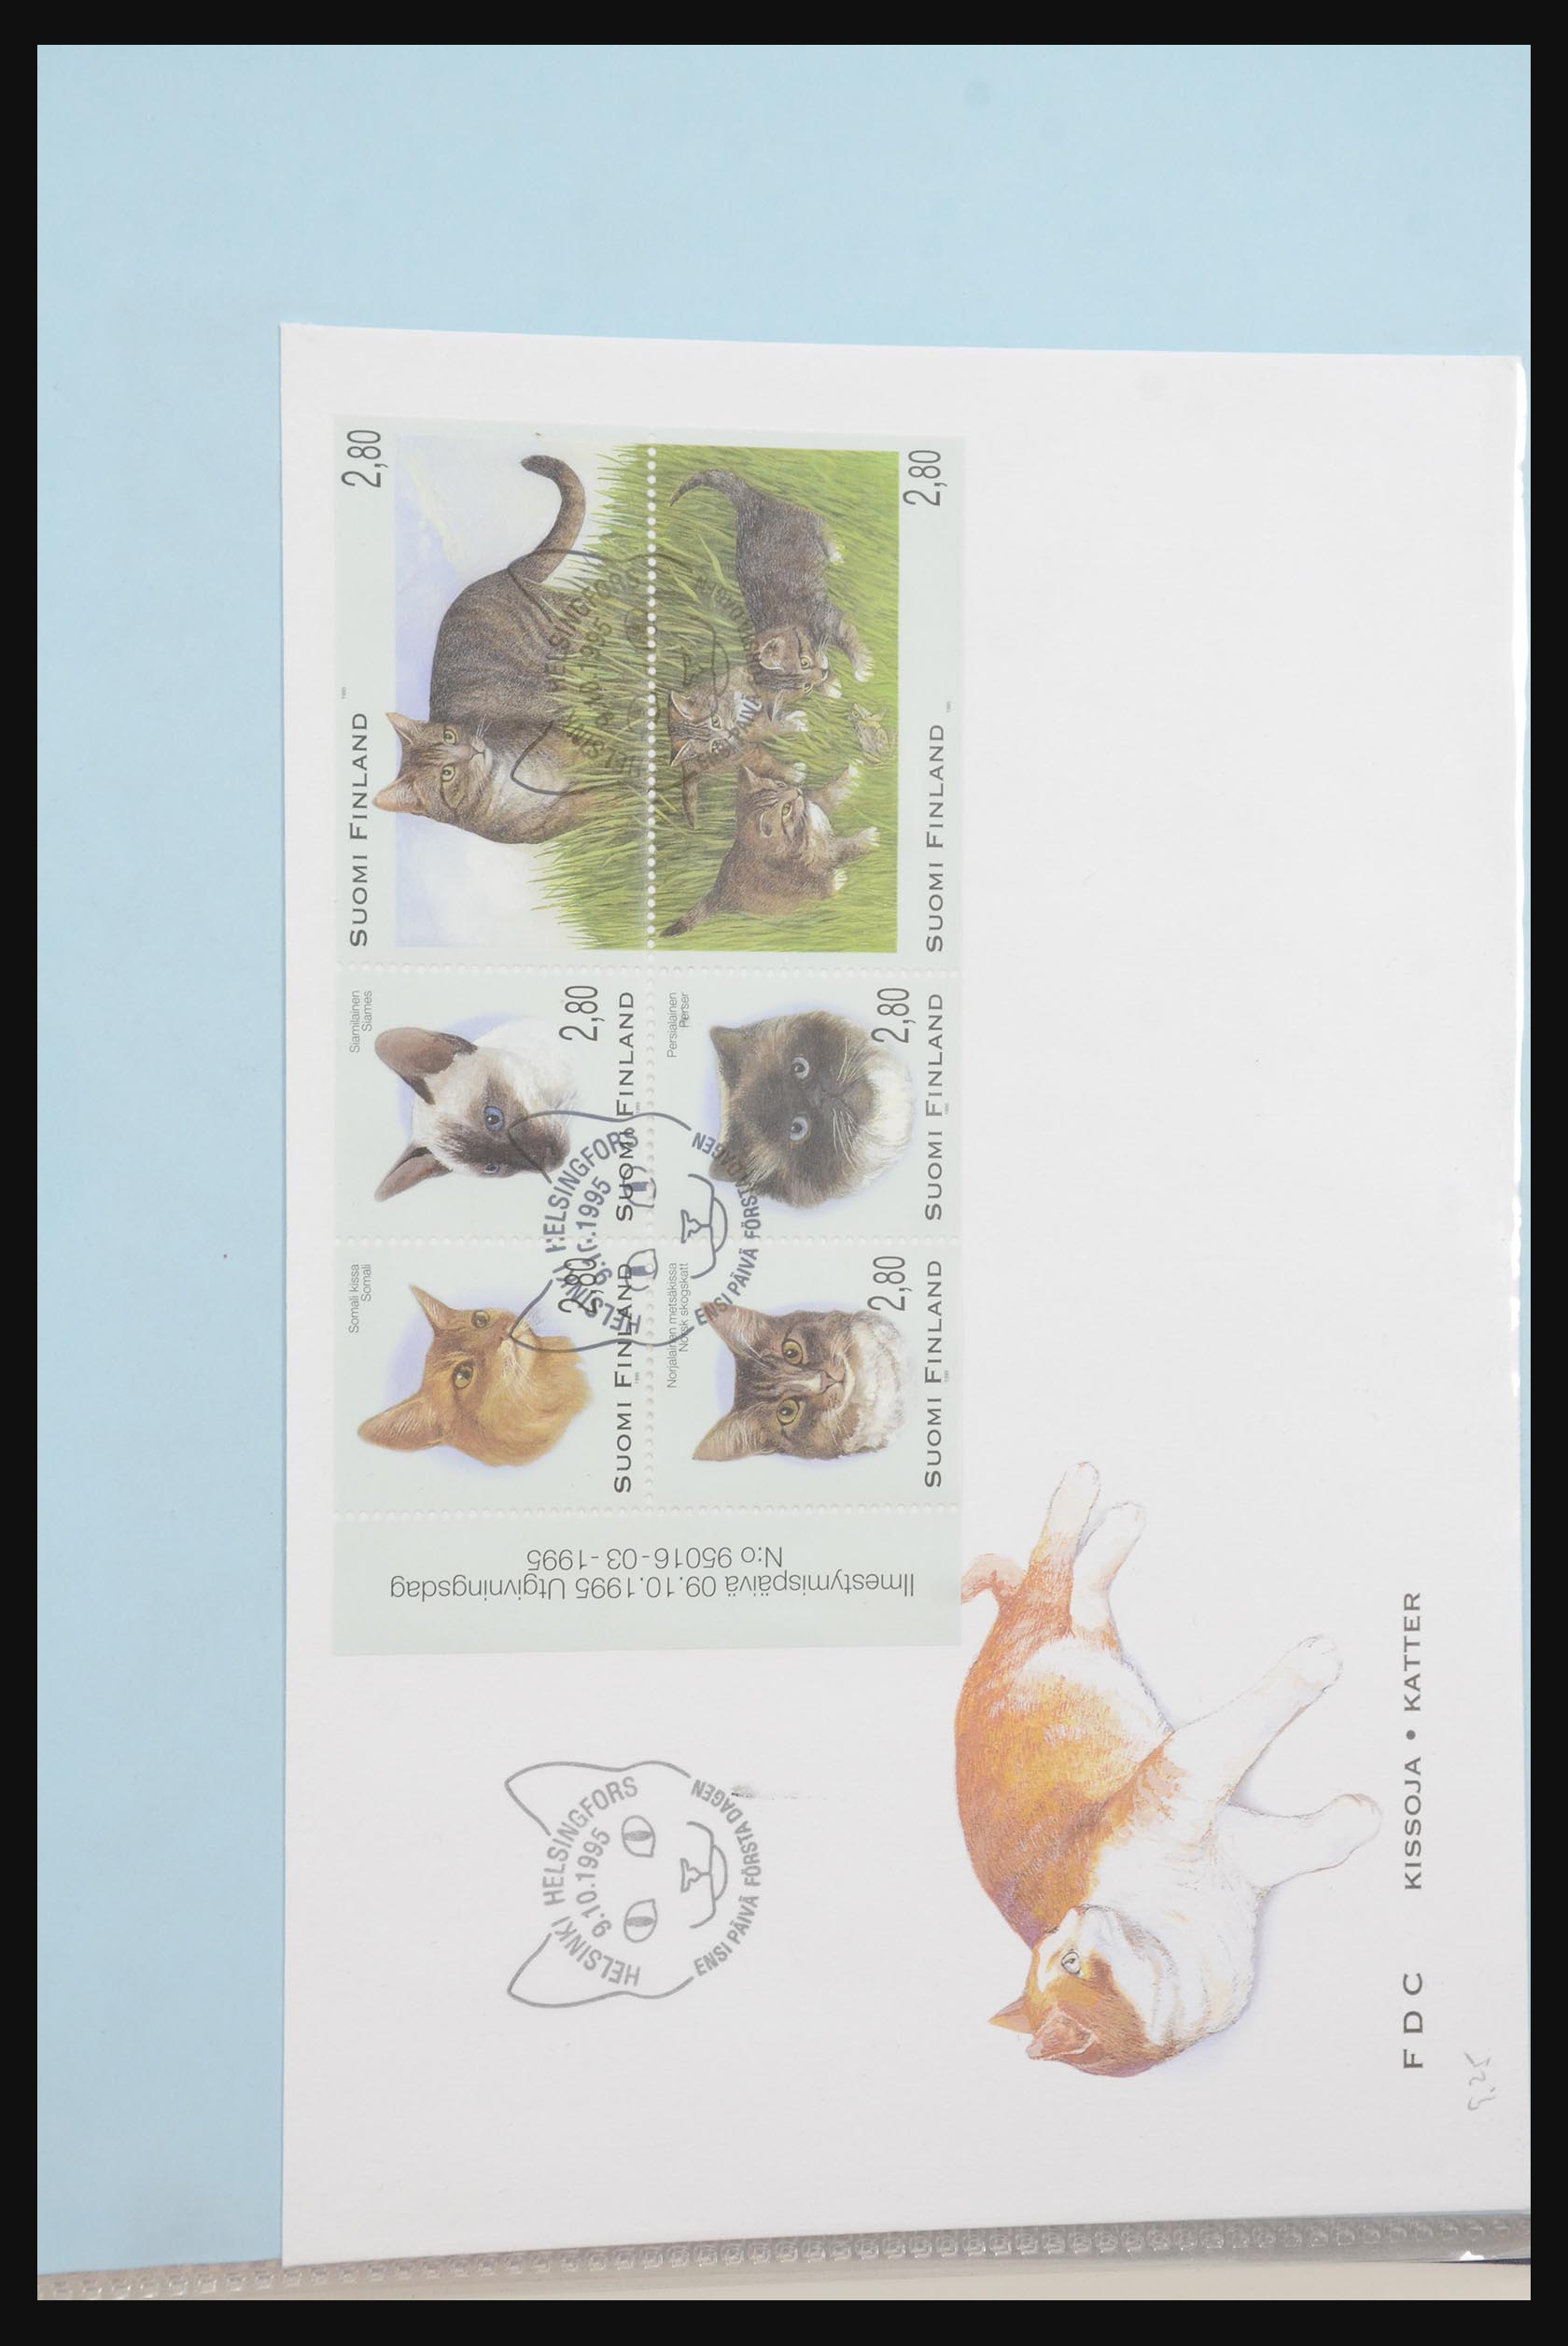 31915 021 - 31915 Western Europe souvenir sheets and stamp booklets on FDC.